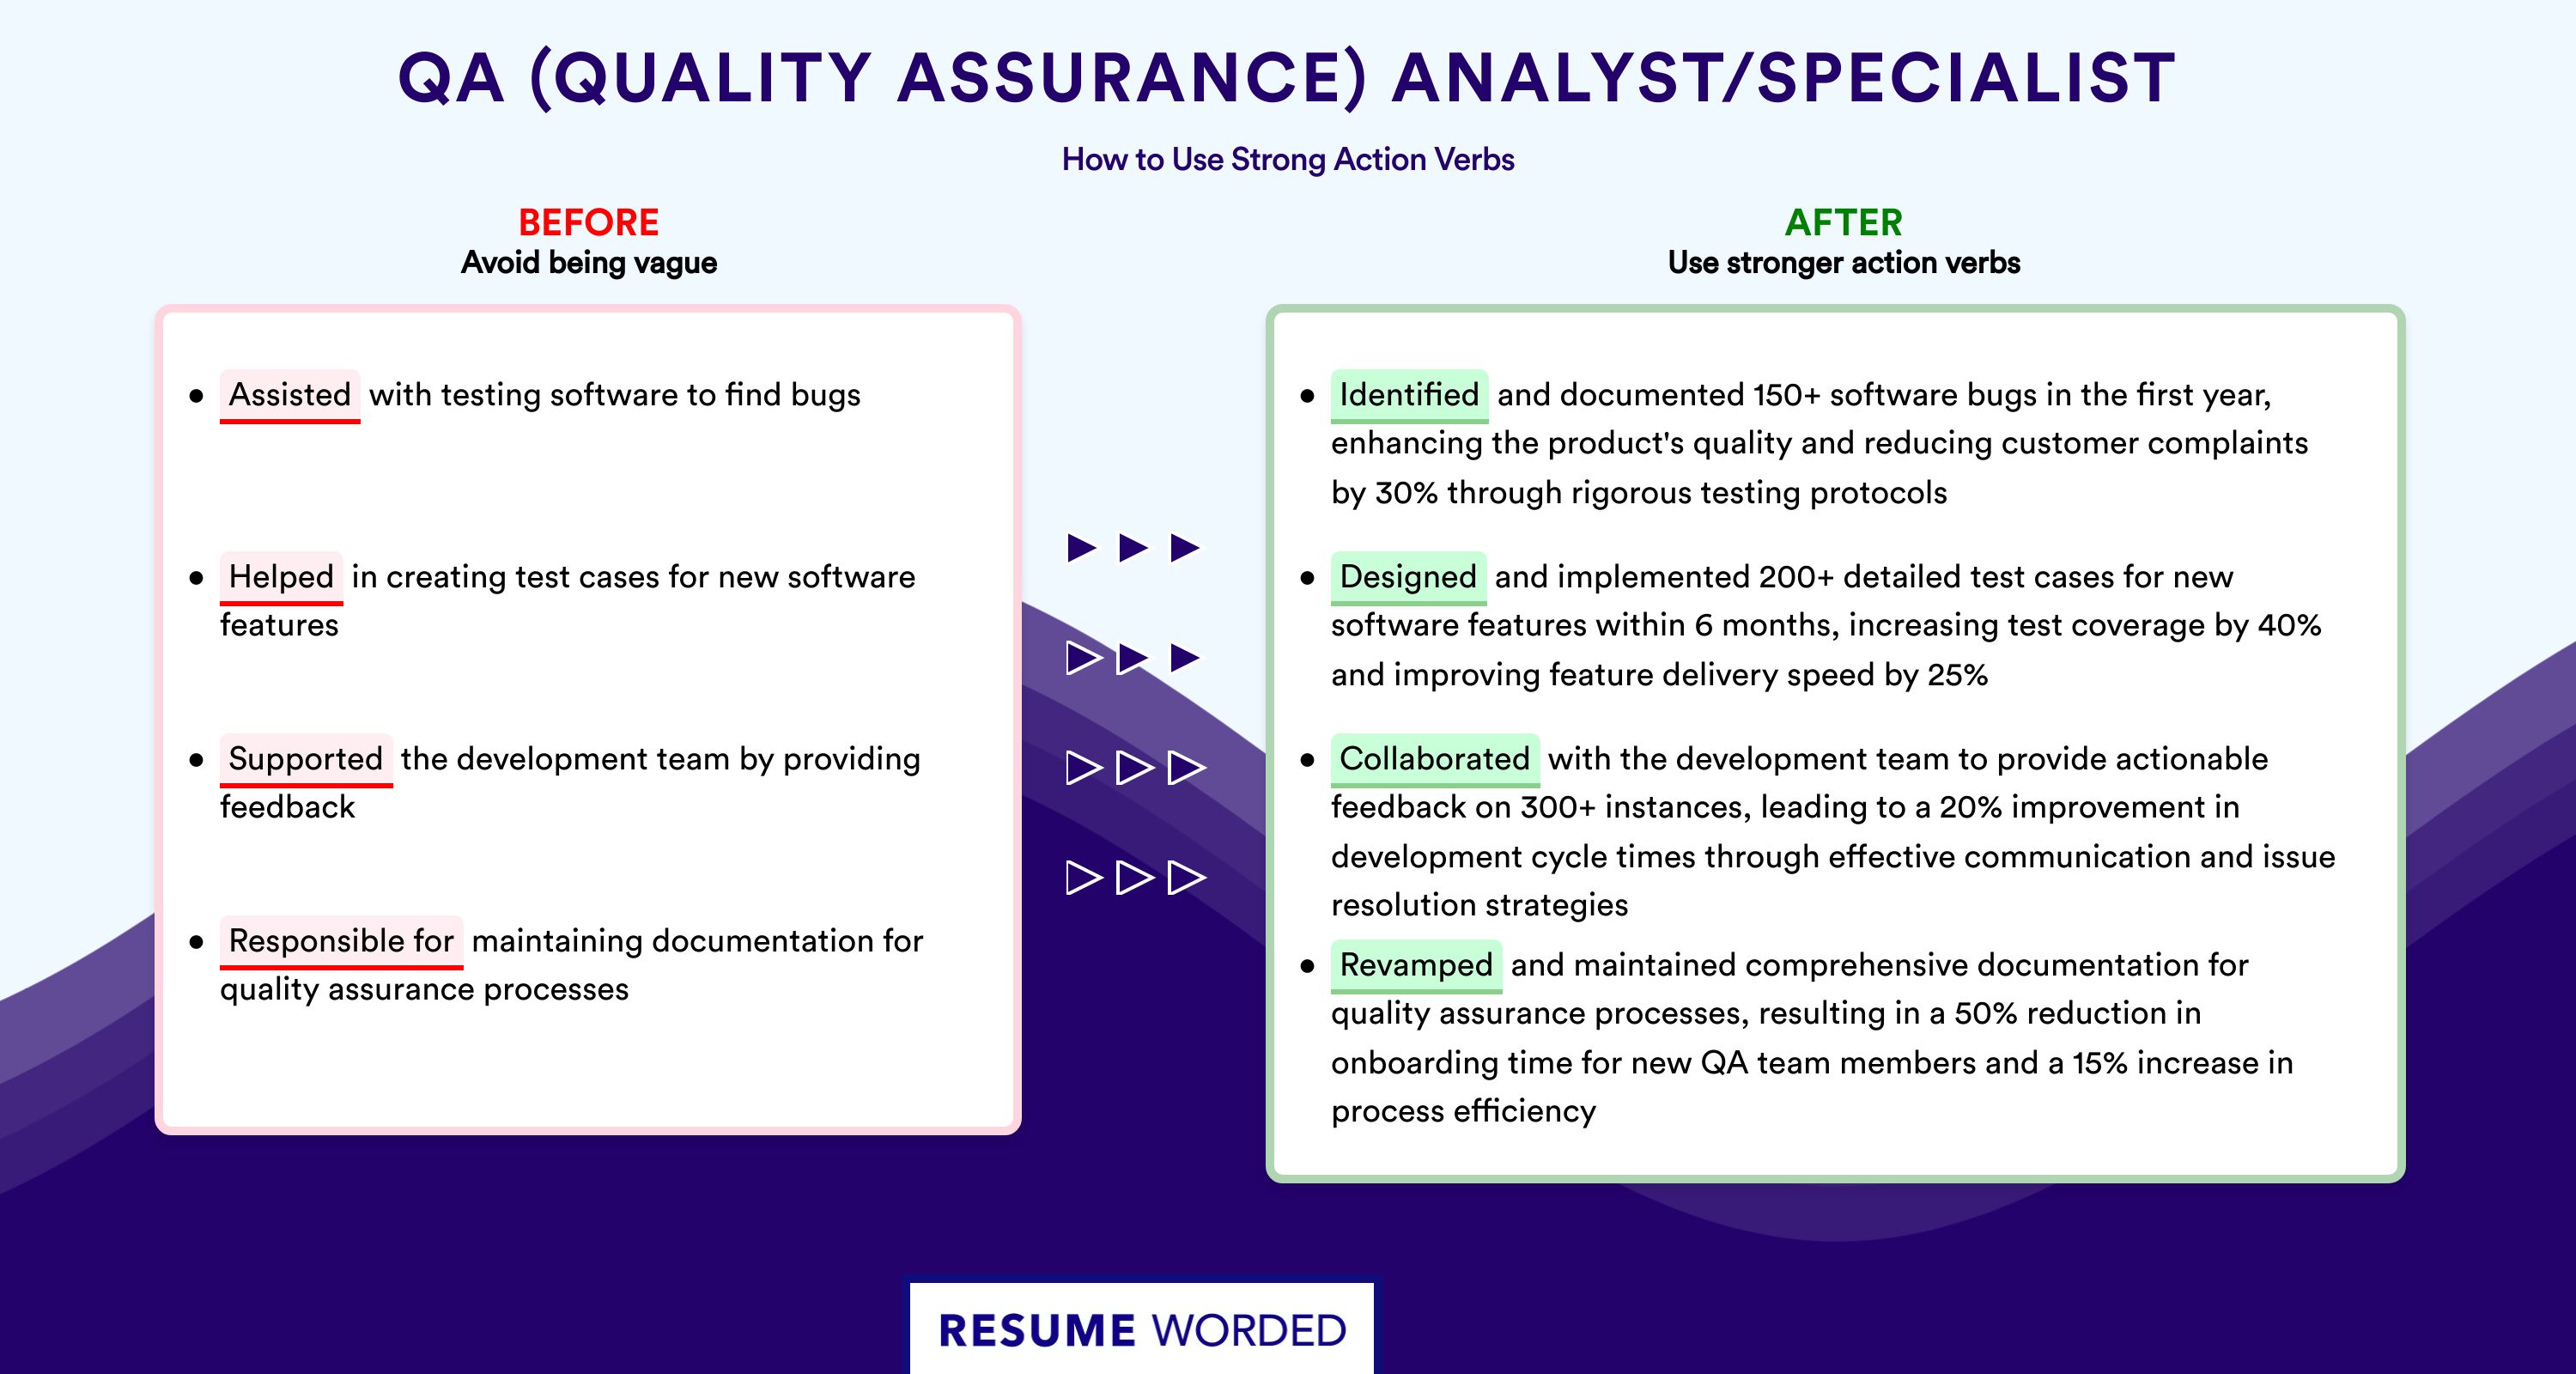 Action Verbs for QA (Quality Assurance) Analyst/Specialist